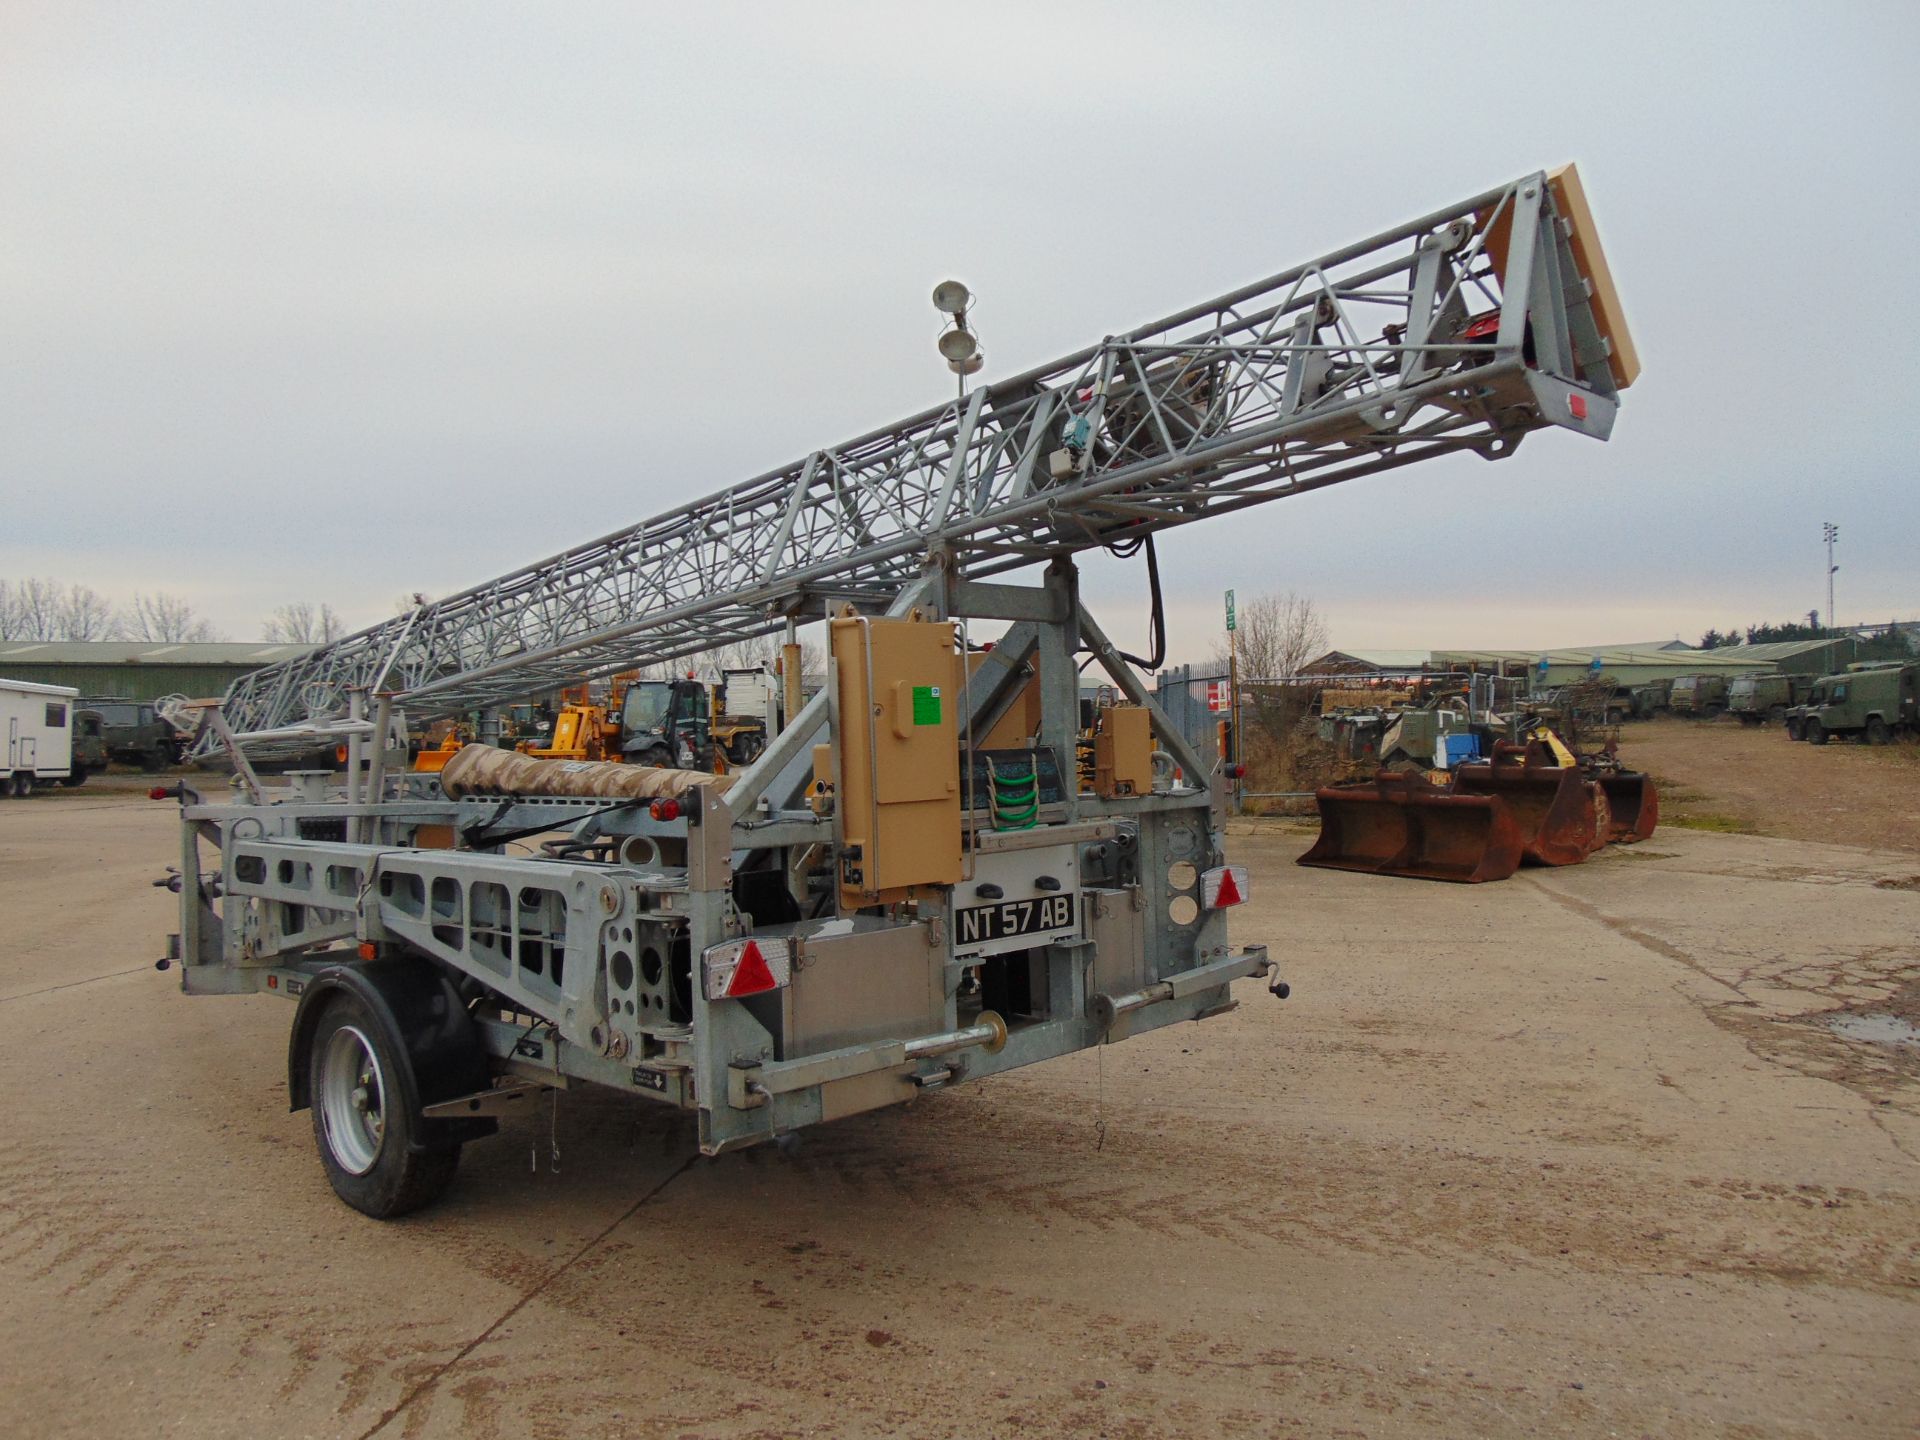 Ex Reserve Sesanti Mobile Surveillance/Communications Tower 21m High Mounted on Single Axle Trailer - Image 6 of 44